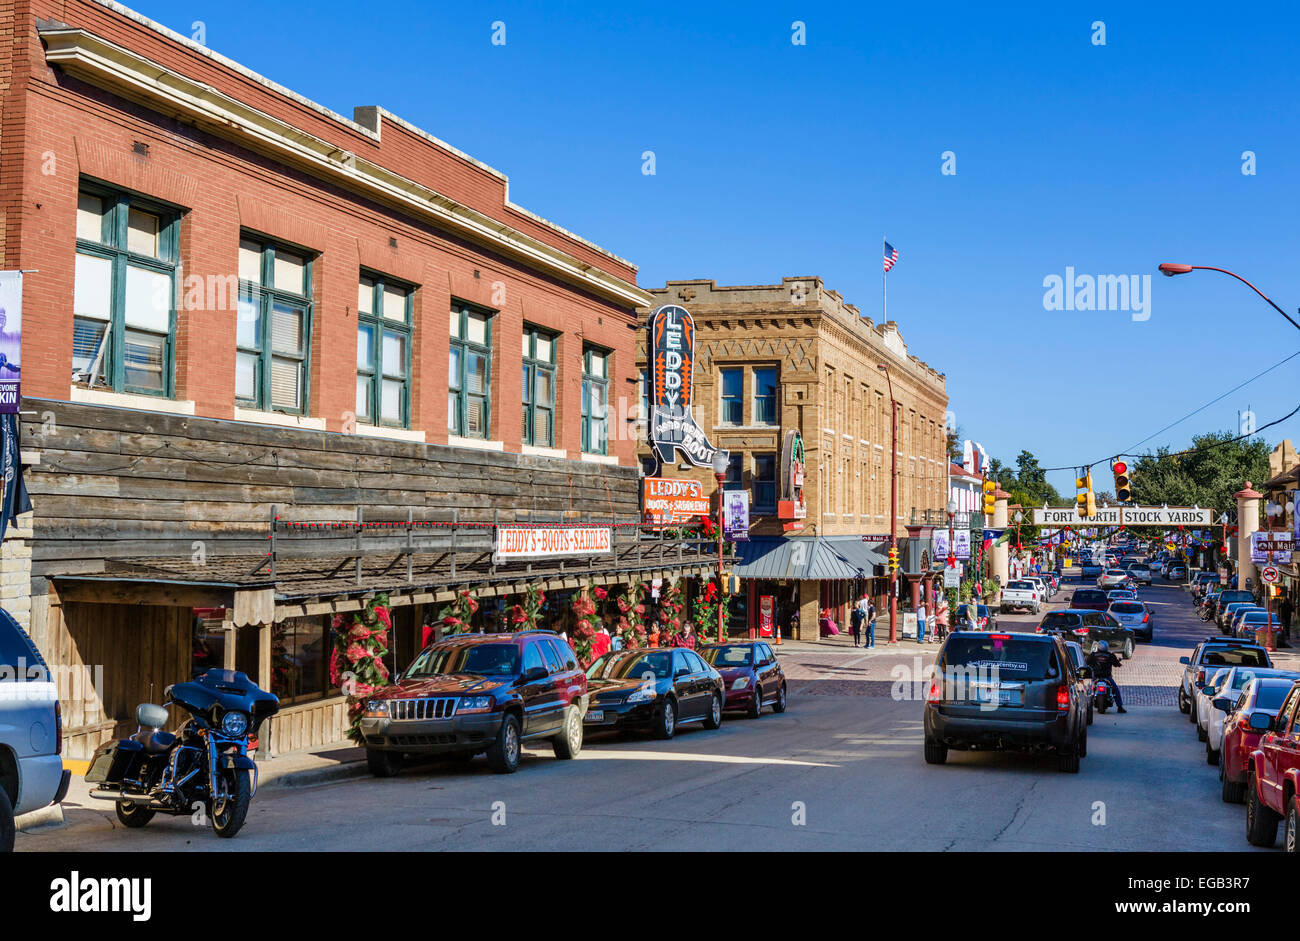 Exchange Avenue looking towards the intersection with Main Street, Stockyards District,  Fort Worth, Texas, USA Stock Photo